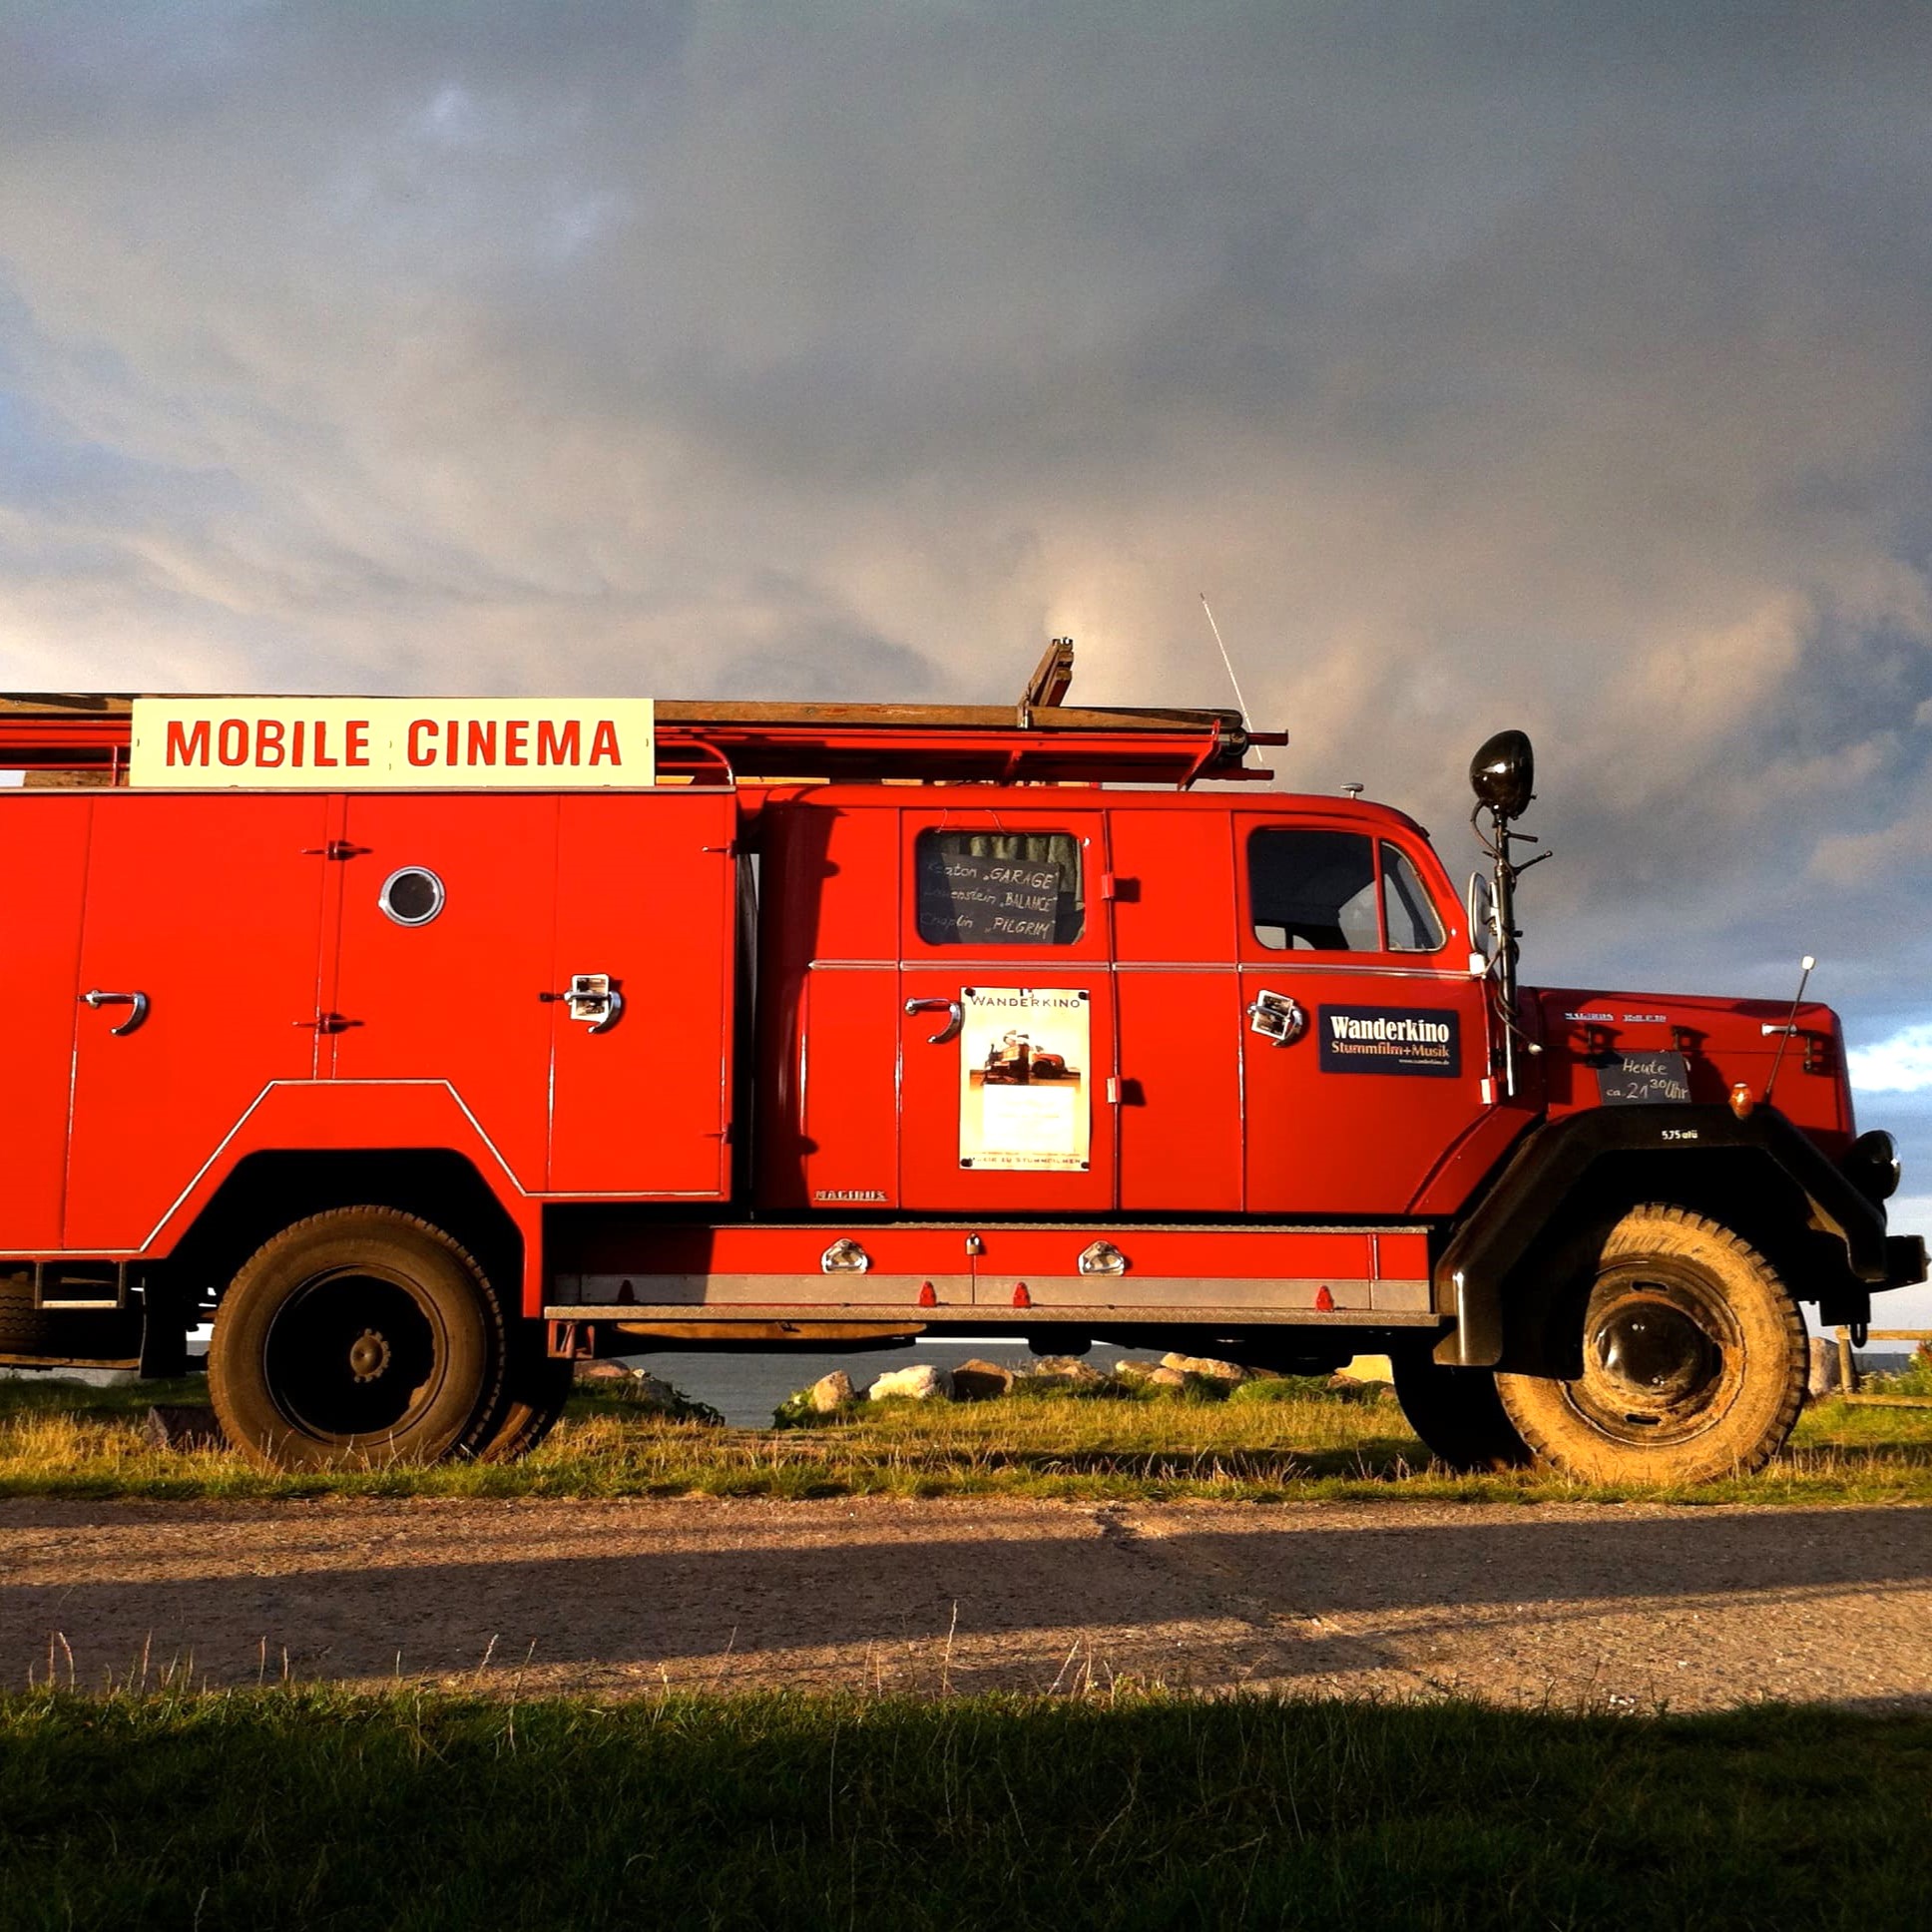 An old red fire engine converted into a traveling cinema with the sign 